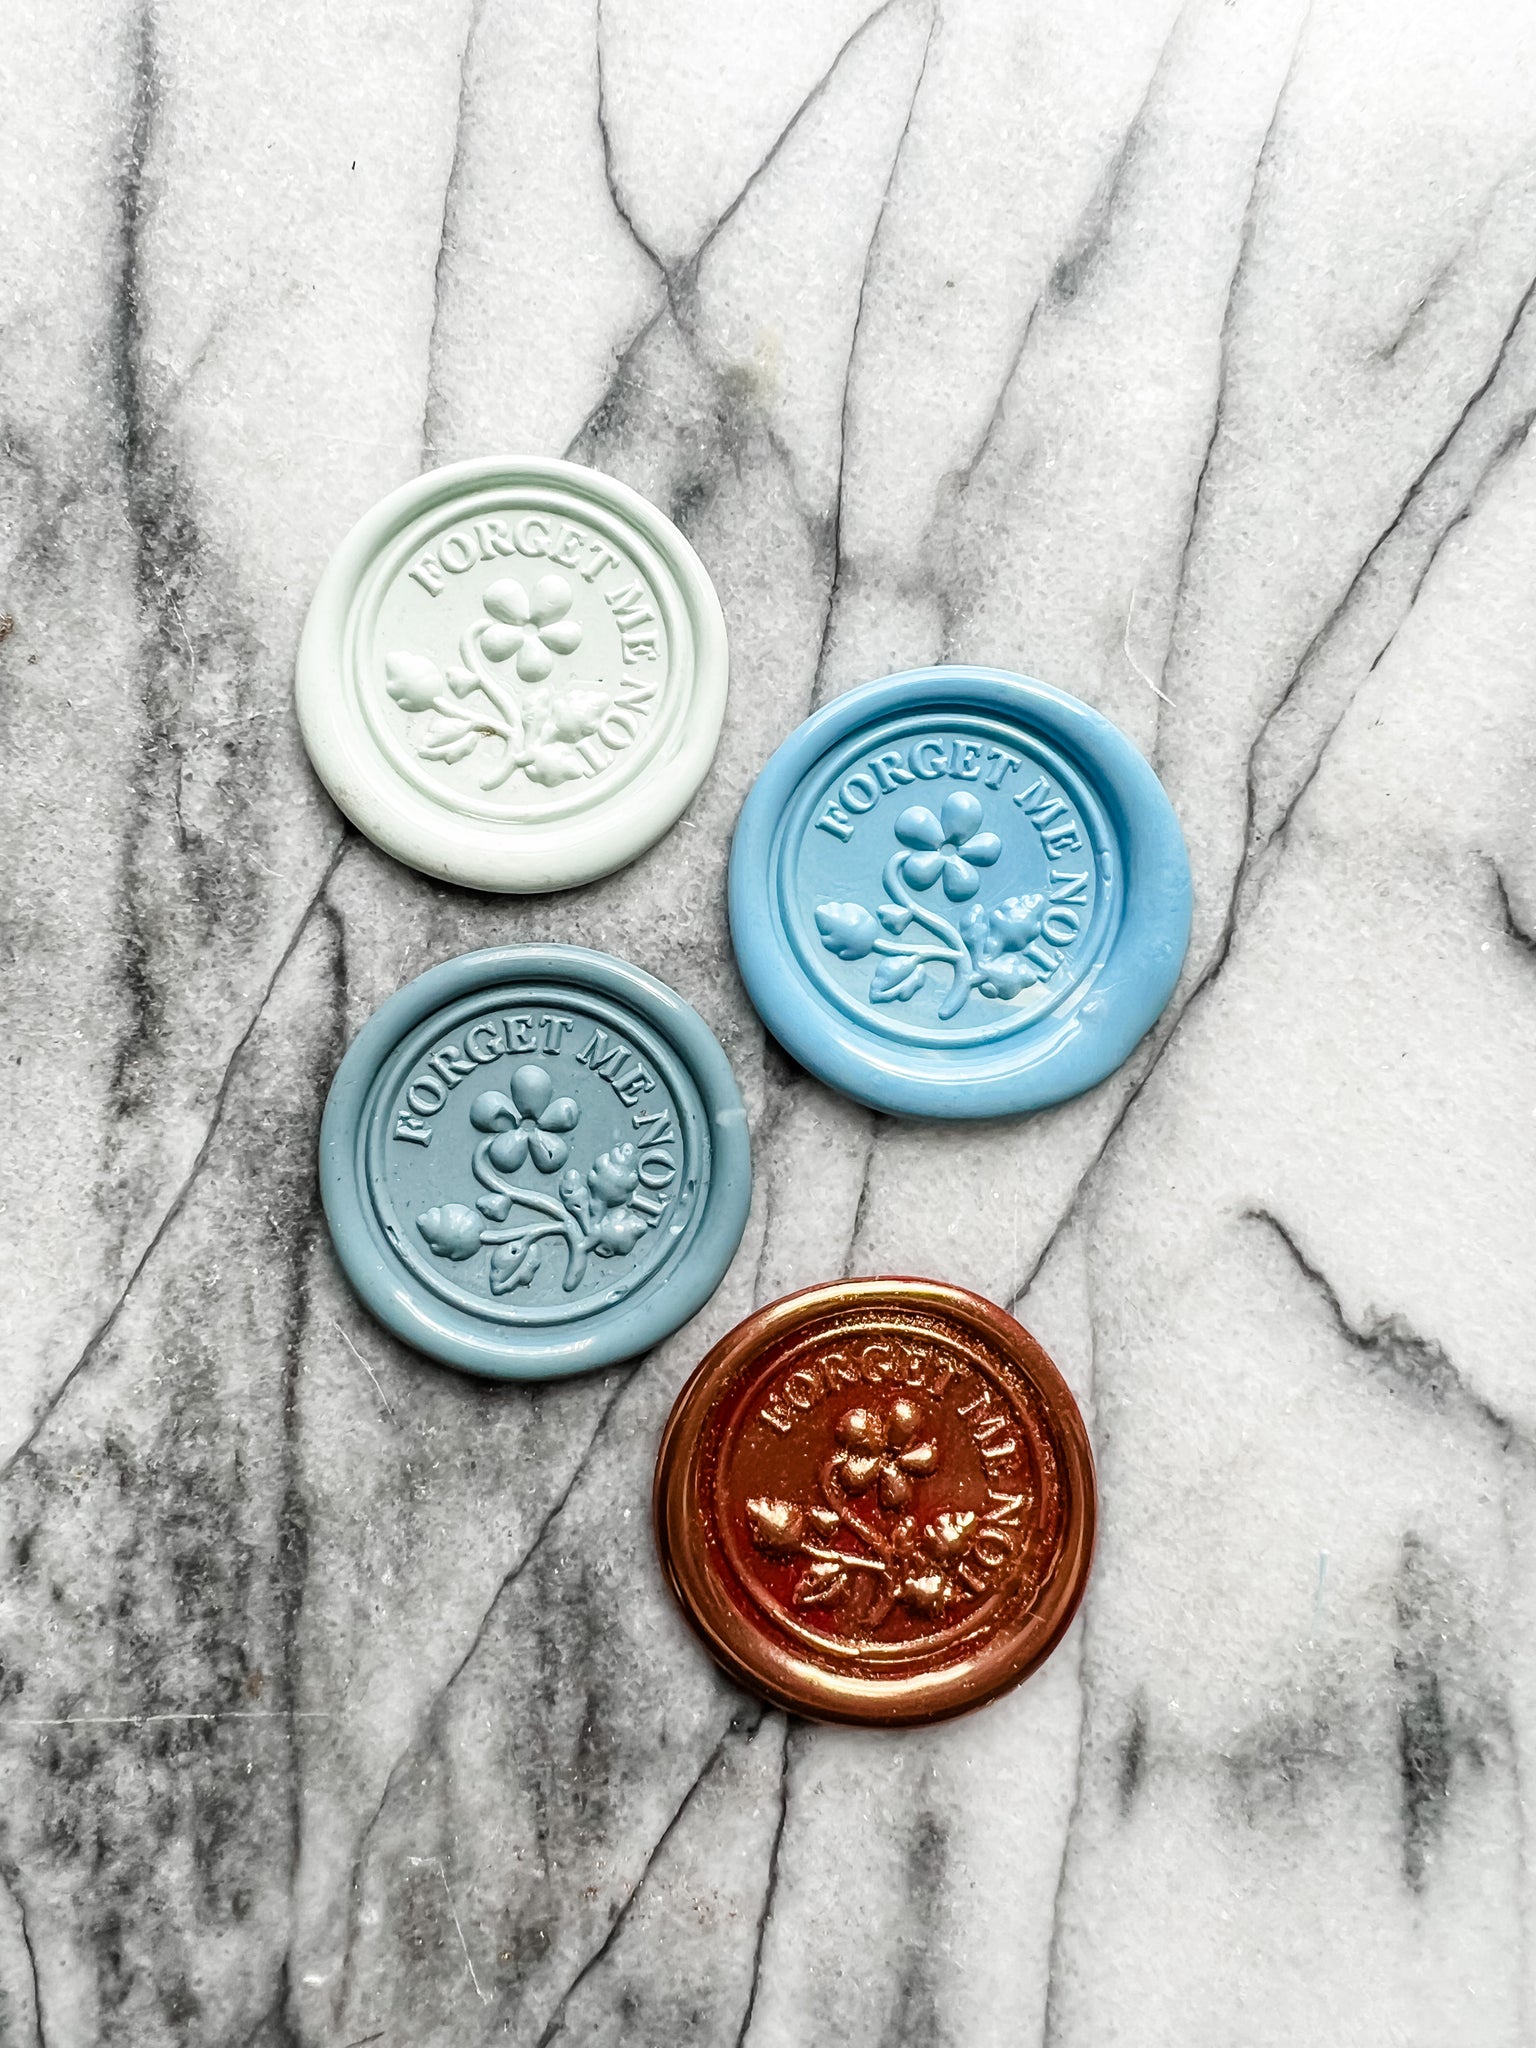 Forget Me Not Wax Seal Kit